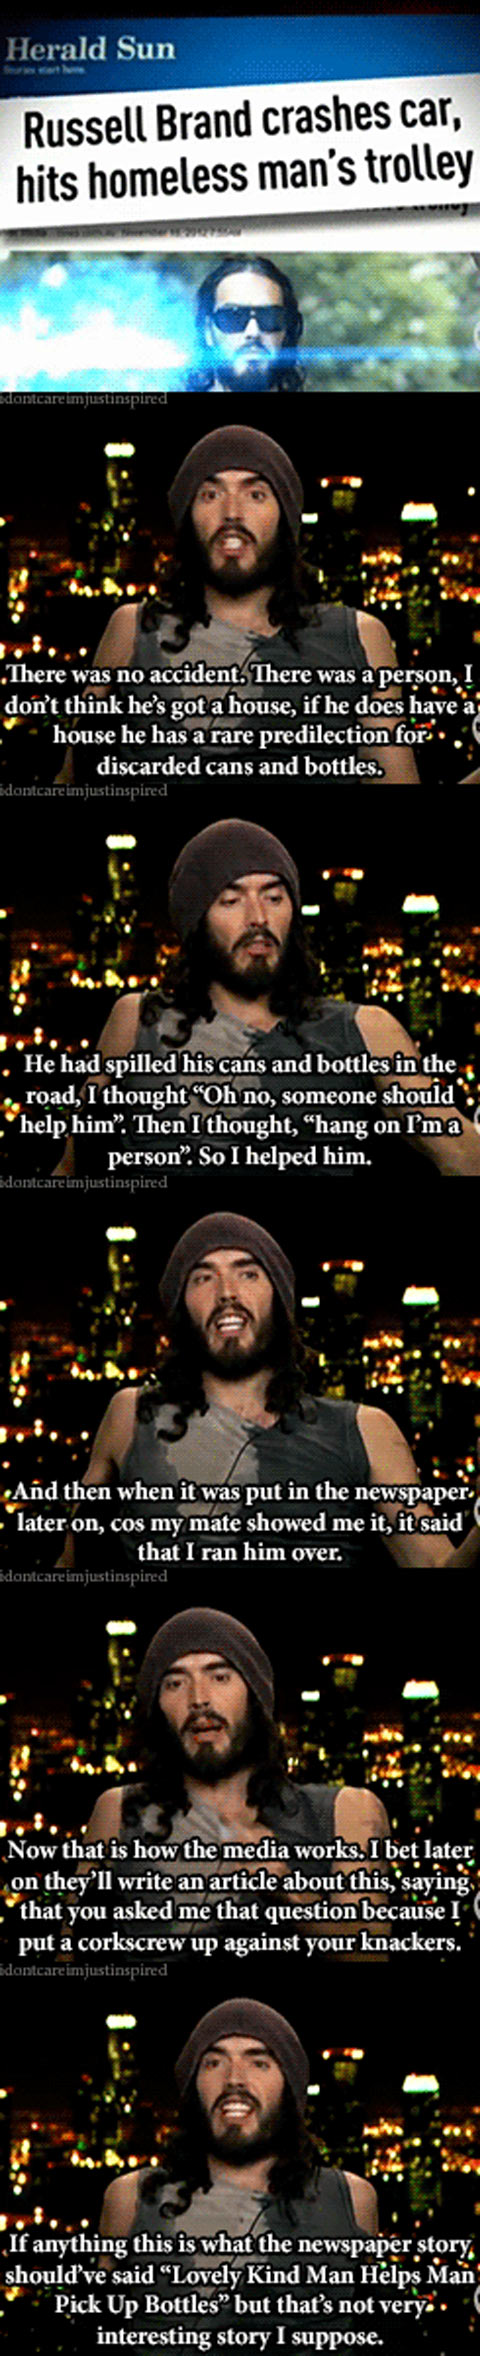 Russell Brand explains the media.